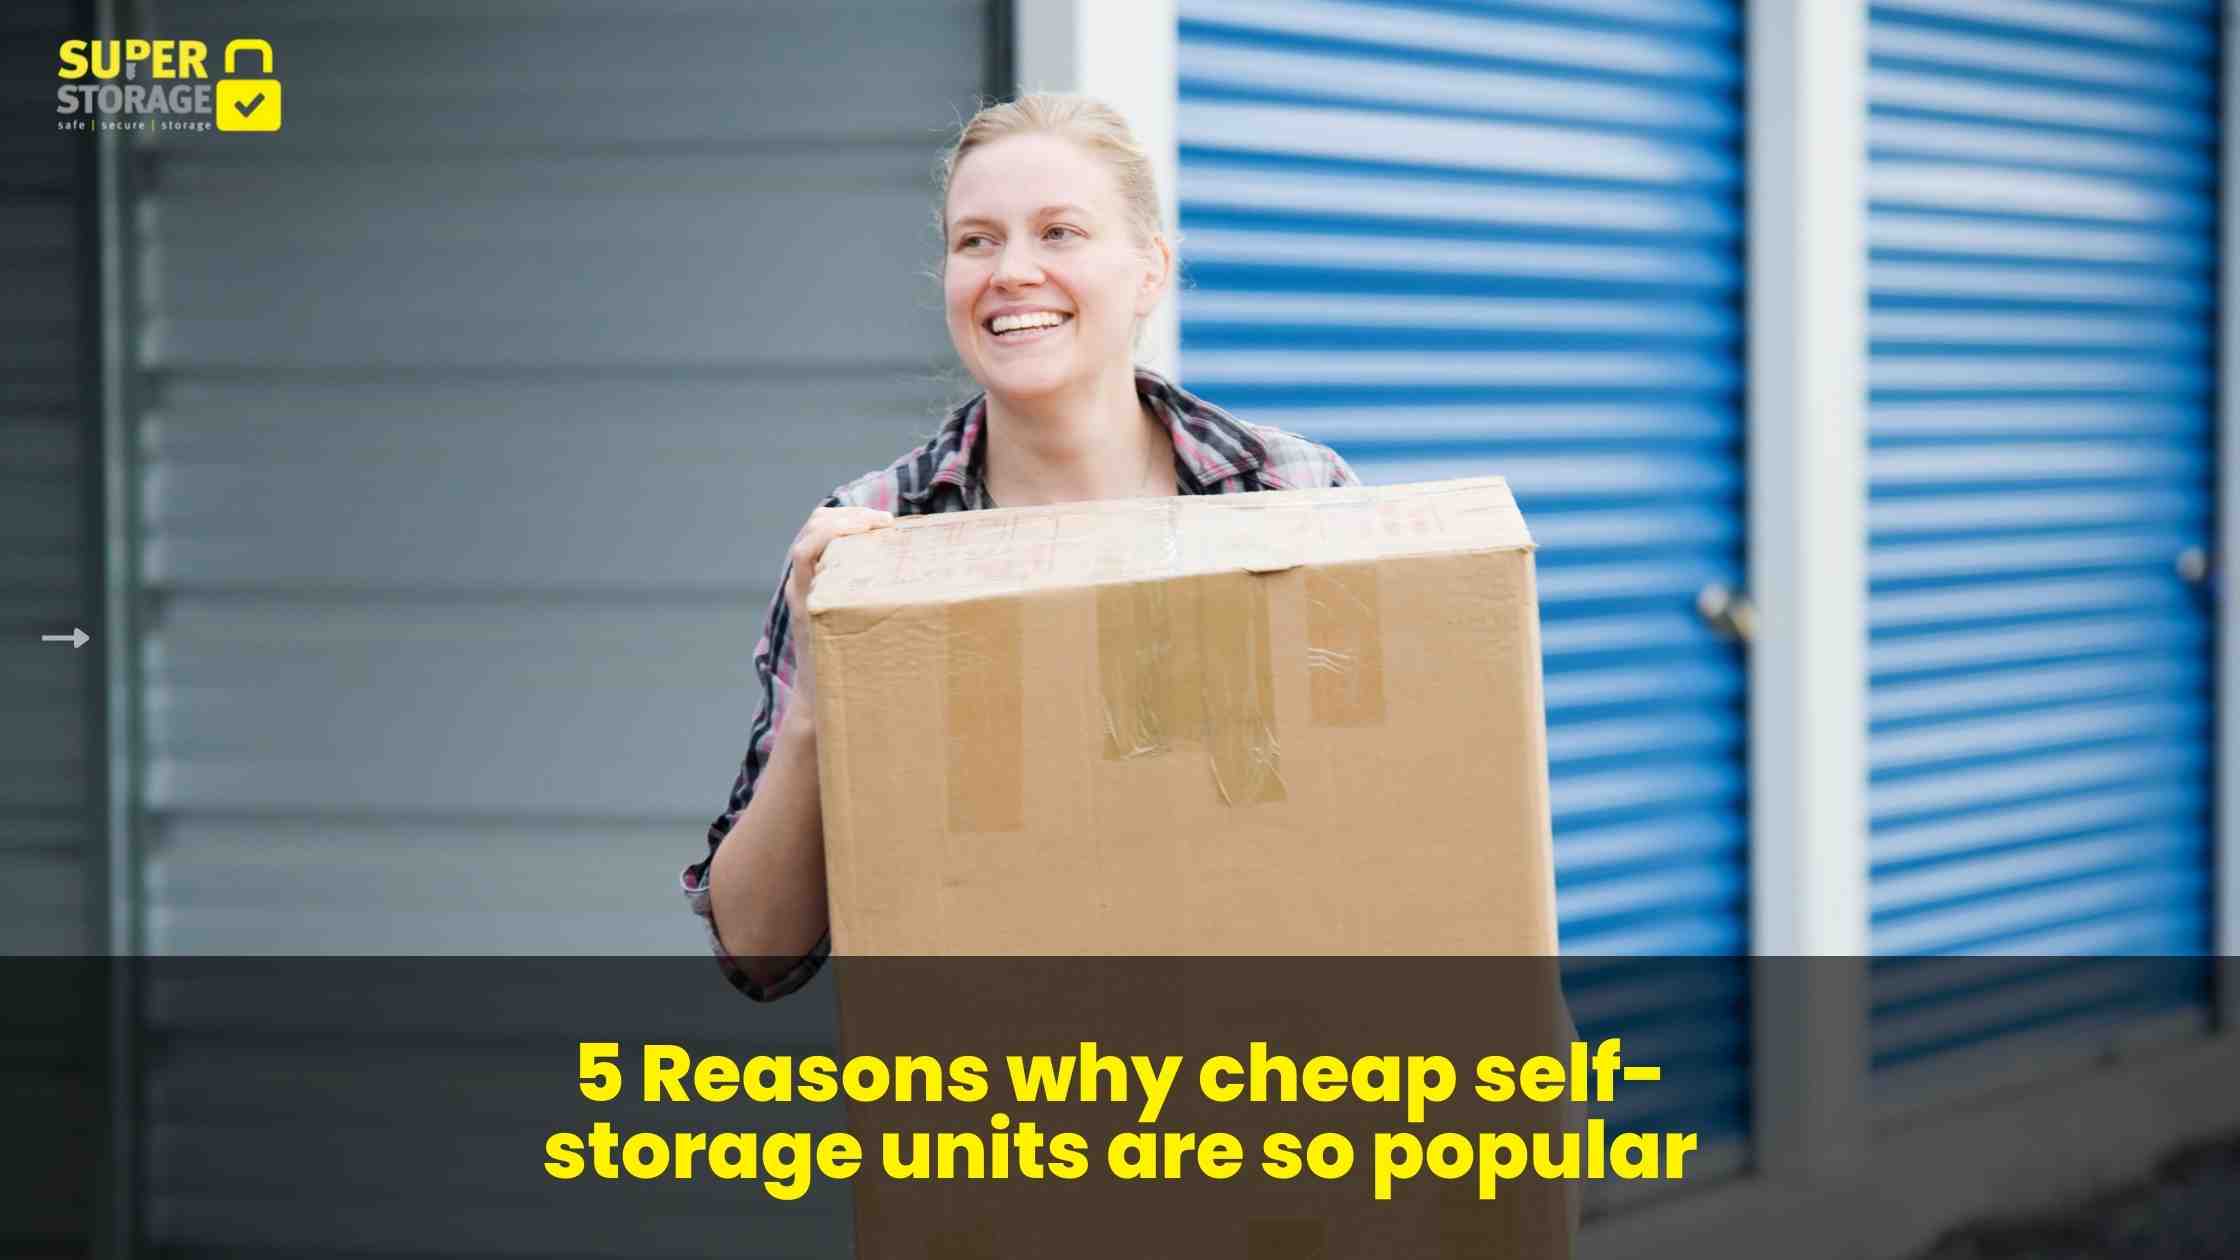 You are currently viewing 5 Reasons why cheap self-storage units are so popular